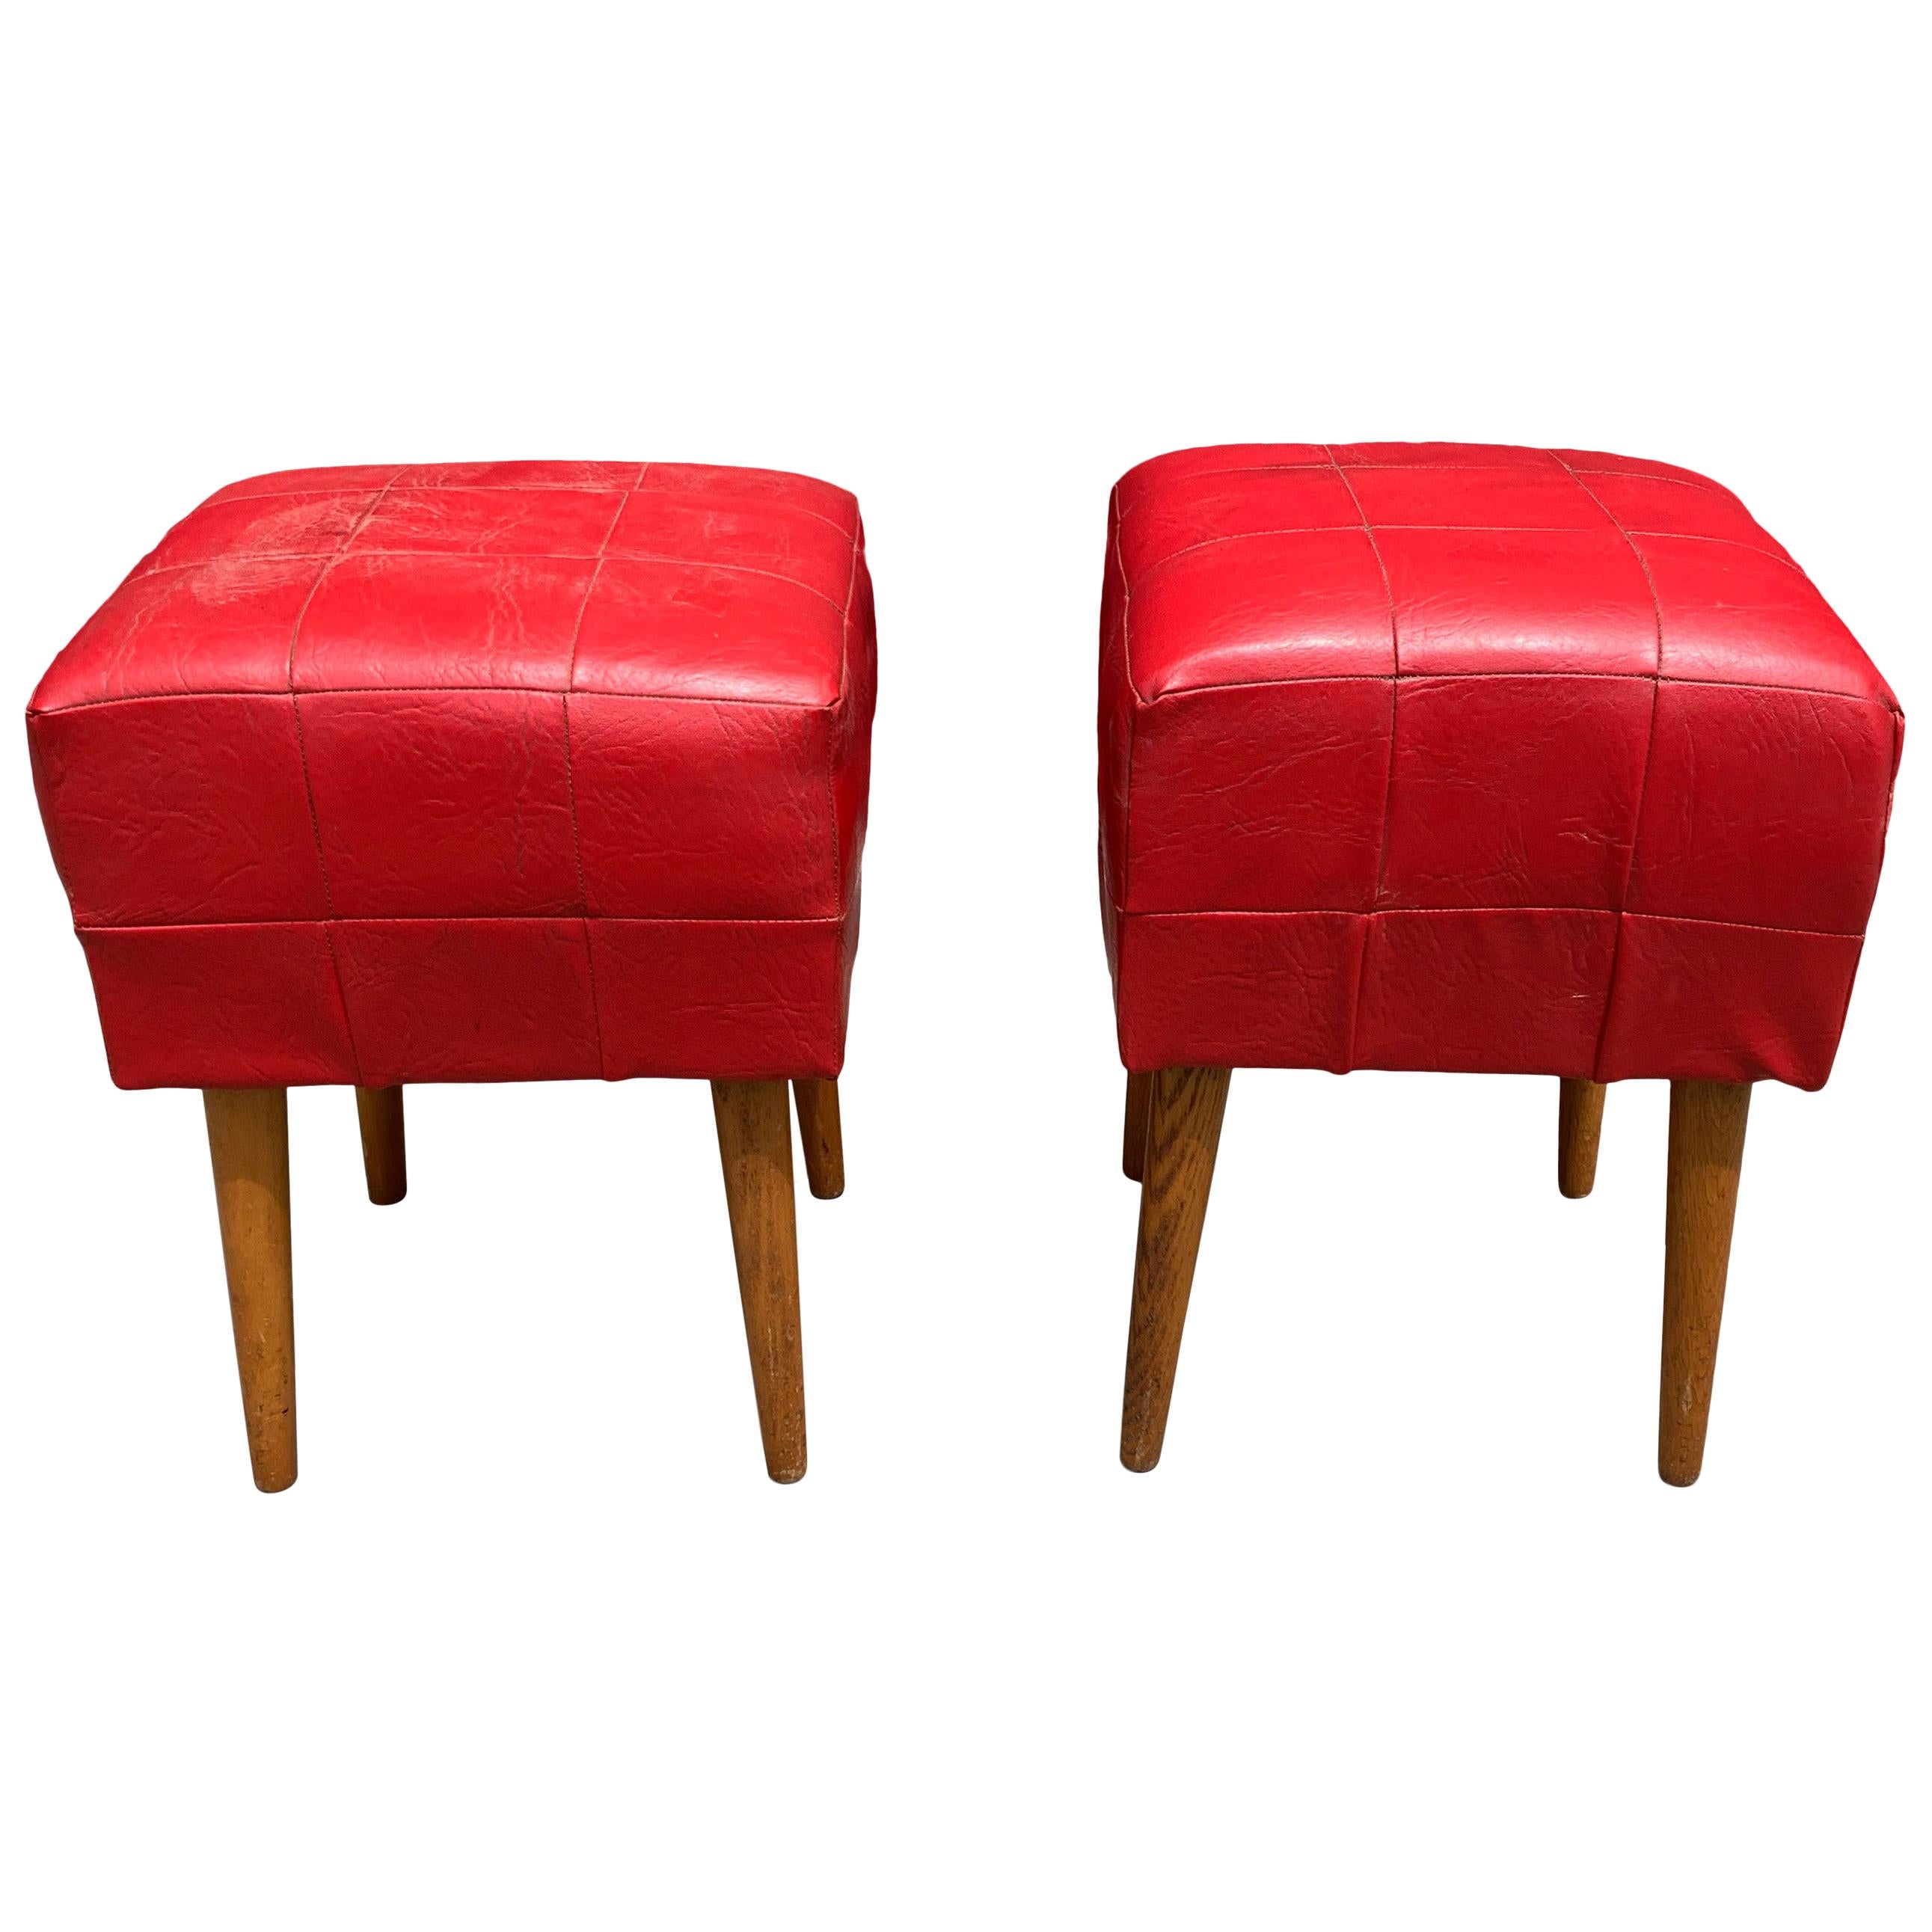 Pair of Midcentury Leather Ottomans